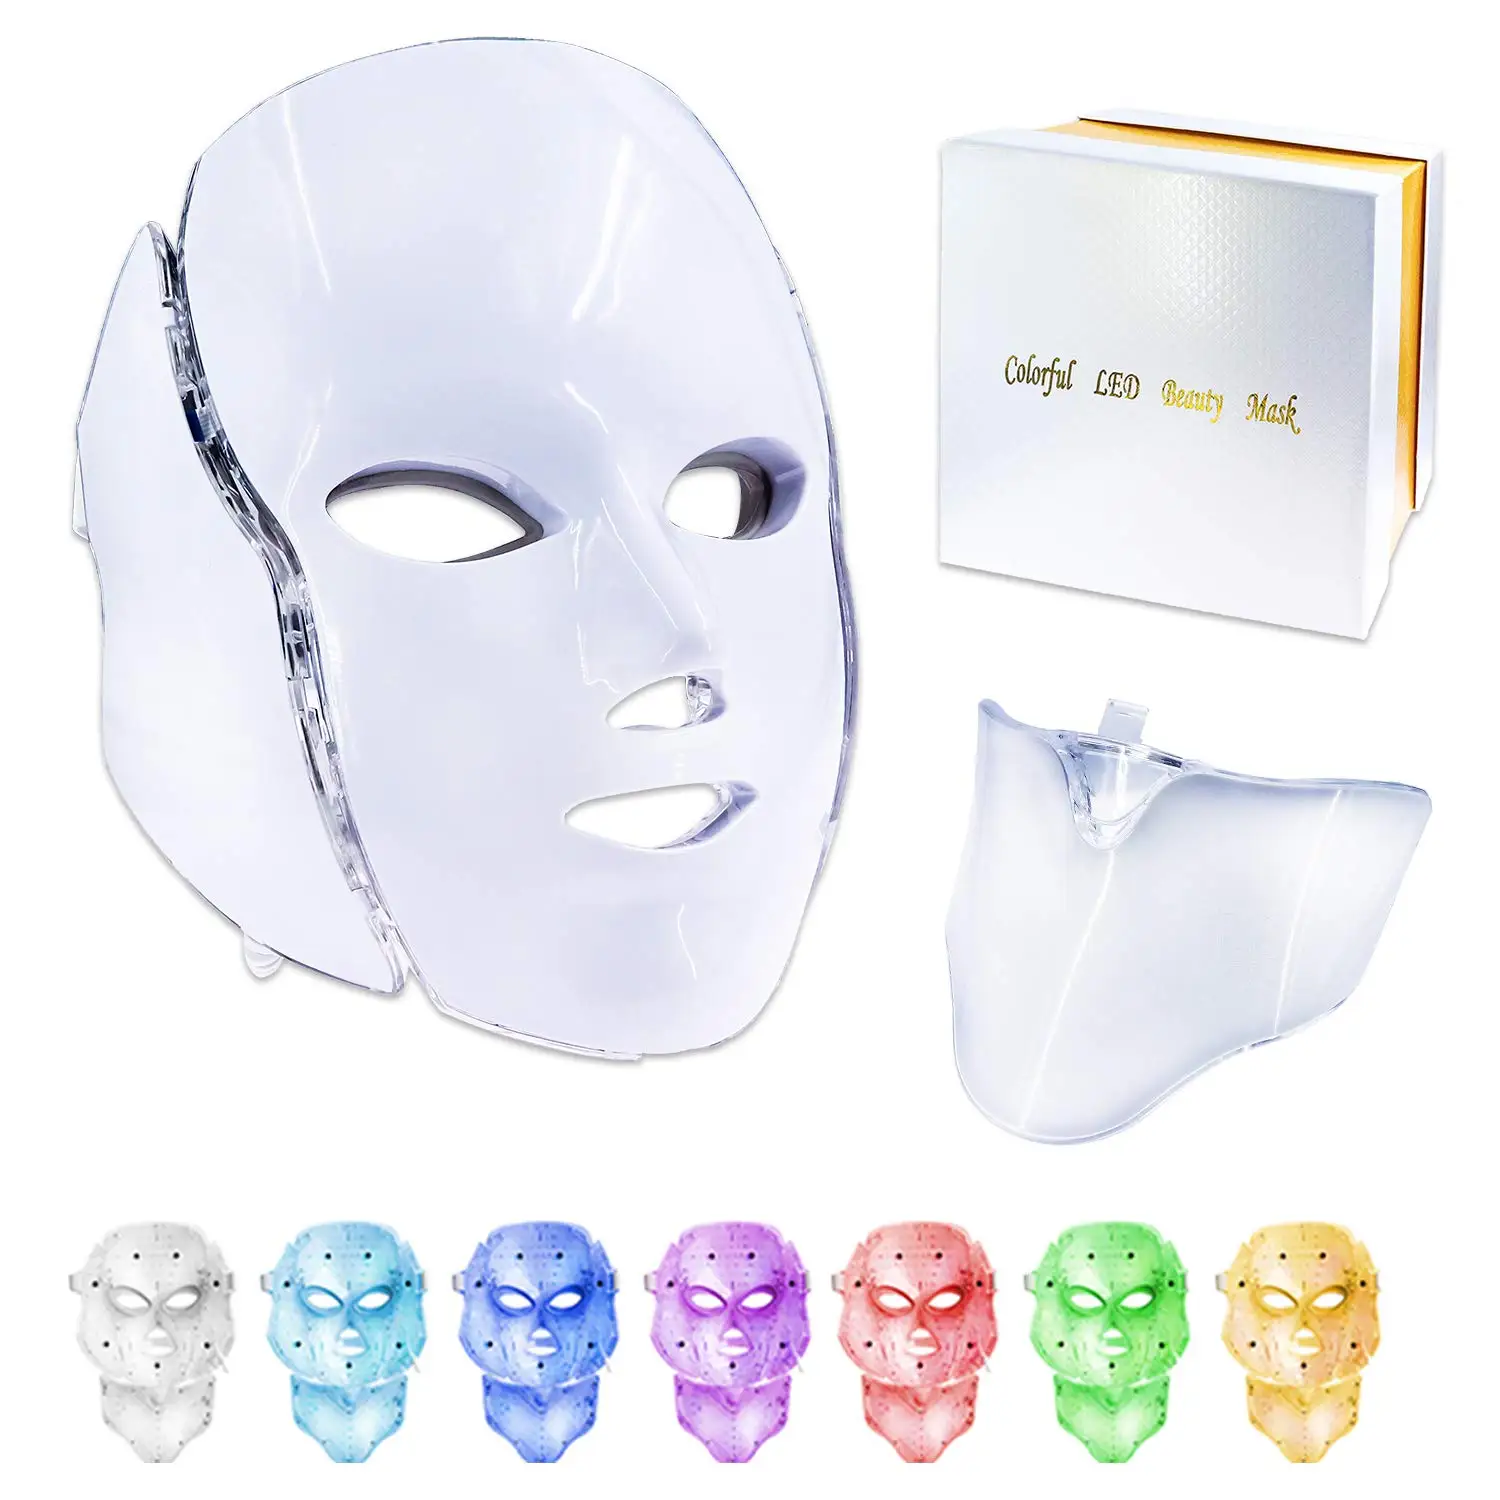 

Led Face Mask Light Therapy Acne Reduction Skin Rejuvenation Photon Mask 7 Color Led Light Therapy Facial Skin Care Beauty Mask